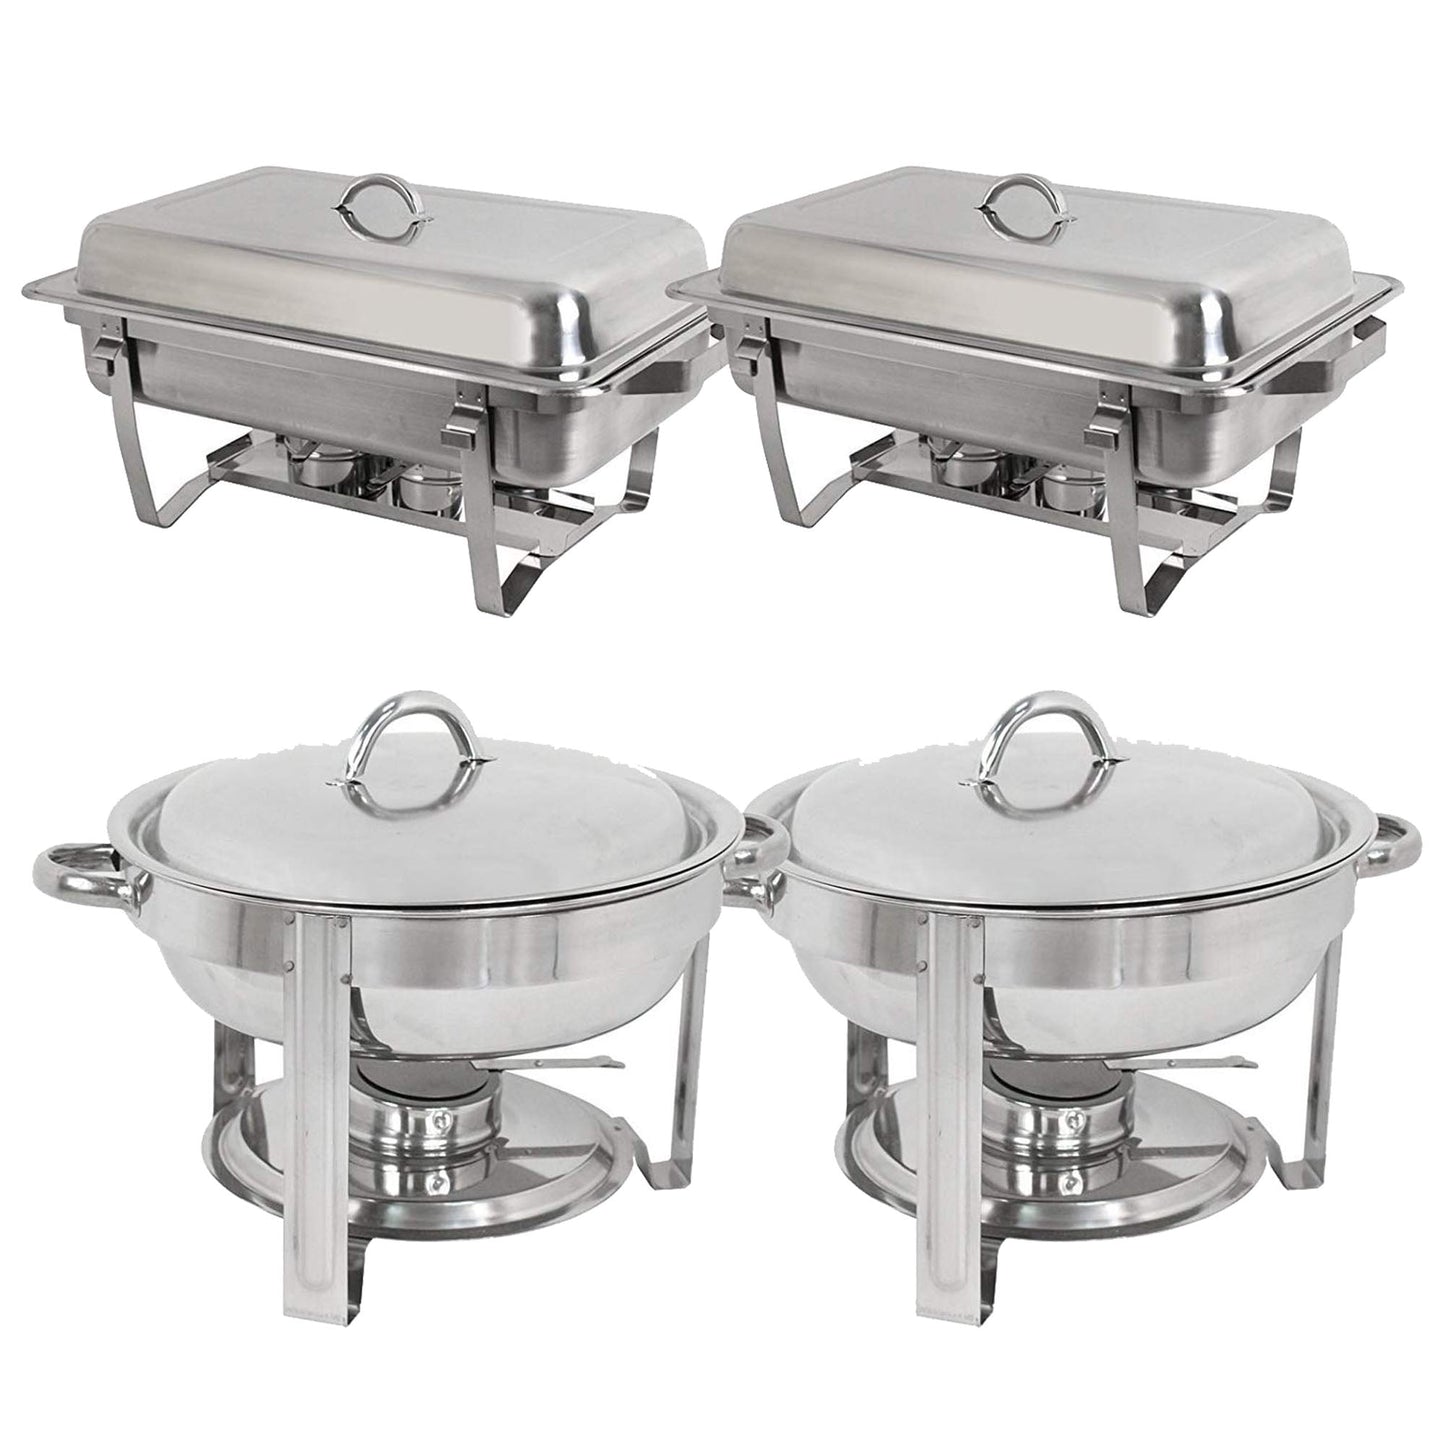 ZENSTYLE Home Restaurants Industrial Buffet Chafing Dishes Sets - 2 Rectangular + 2 Round (Shipped in 2 boxes)